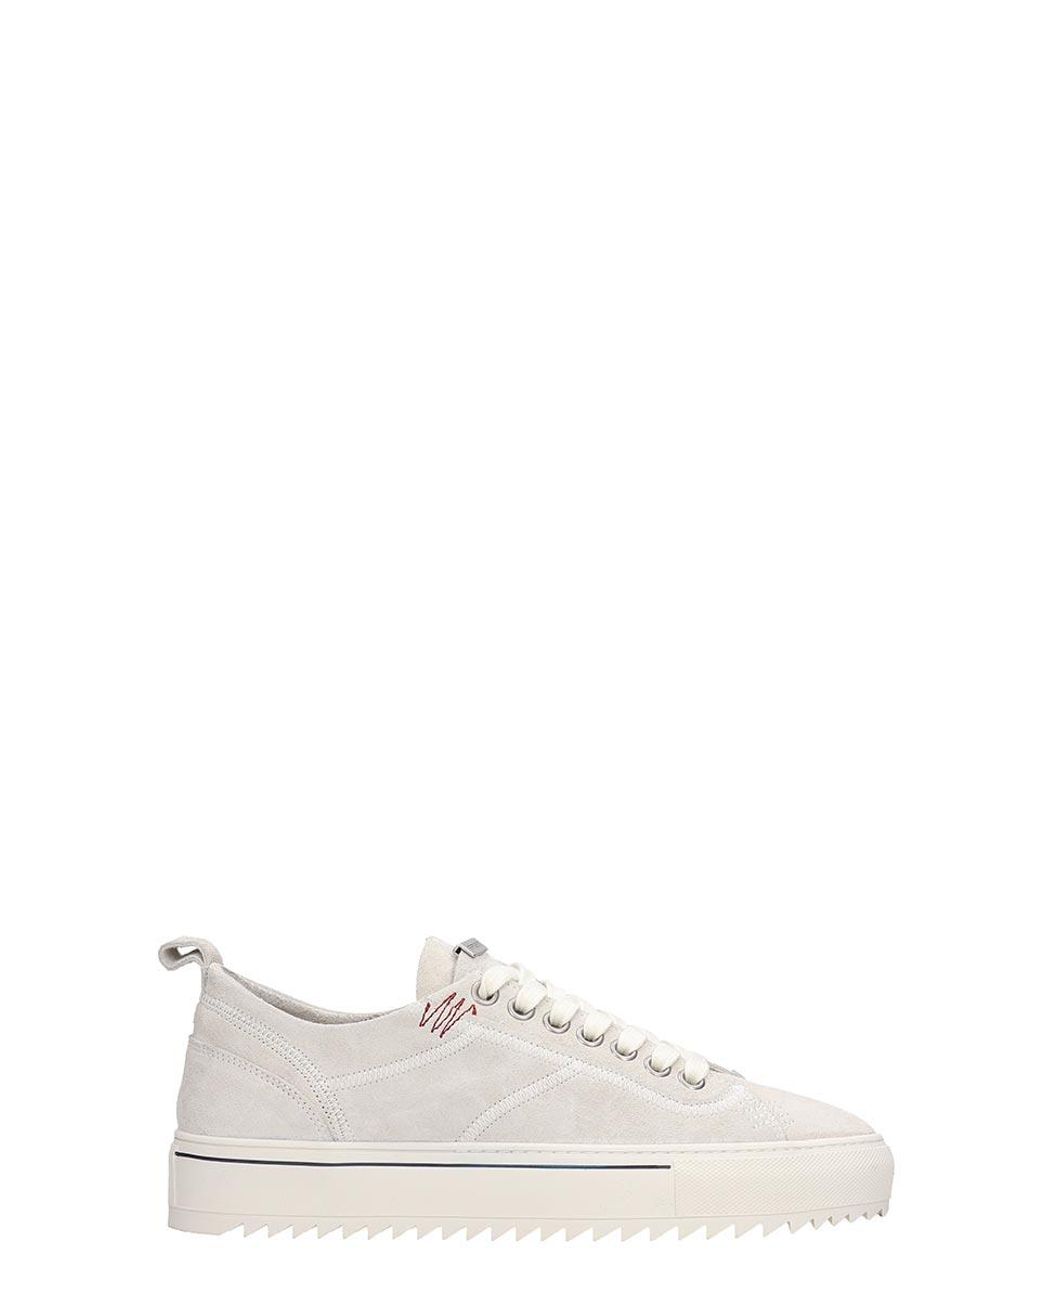 Represent Alpha Low Sneakers In White Suede for Men | Lyst